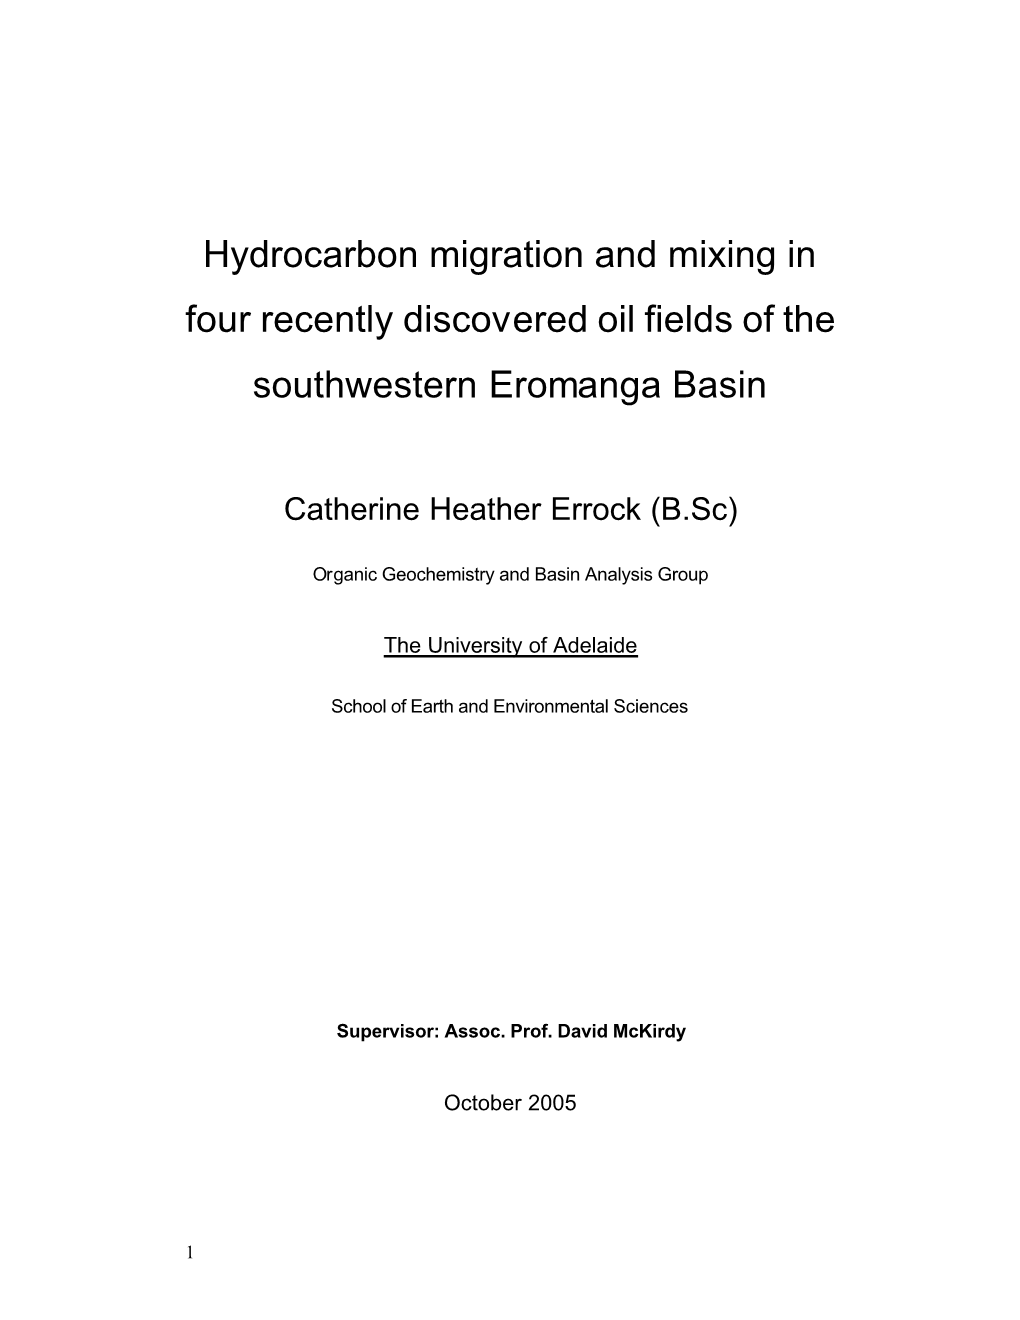 Hydrocarbon Migration and Mixing in Four Recently Discovered Oil Fields of the Southwestern Eromanga Basin